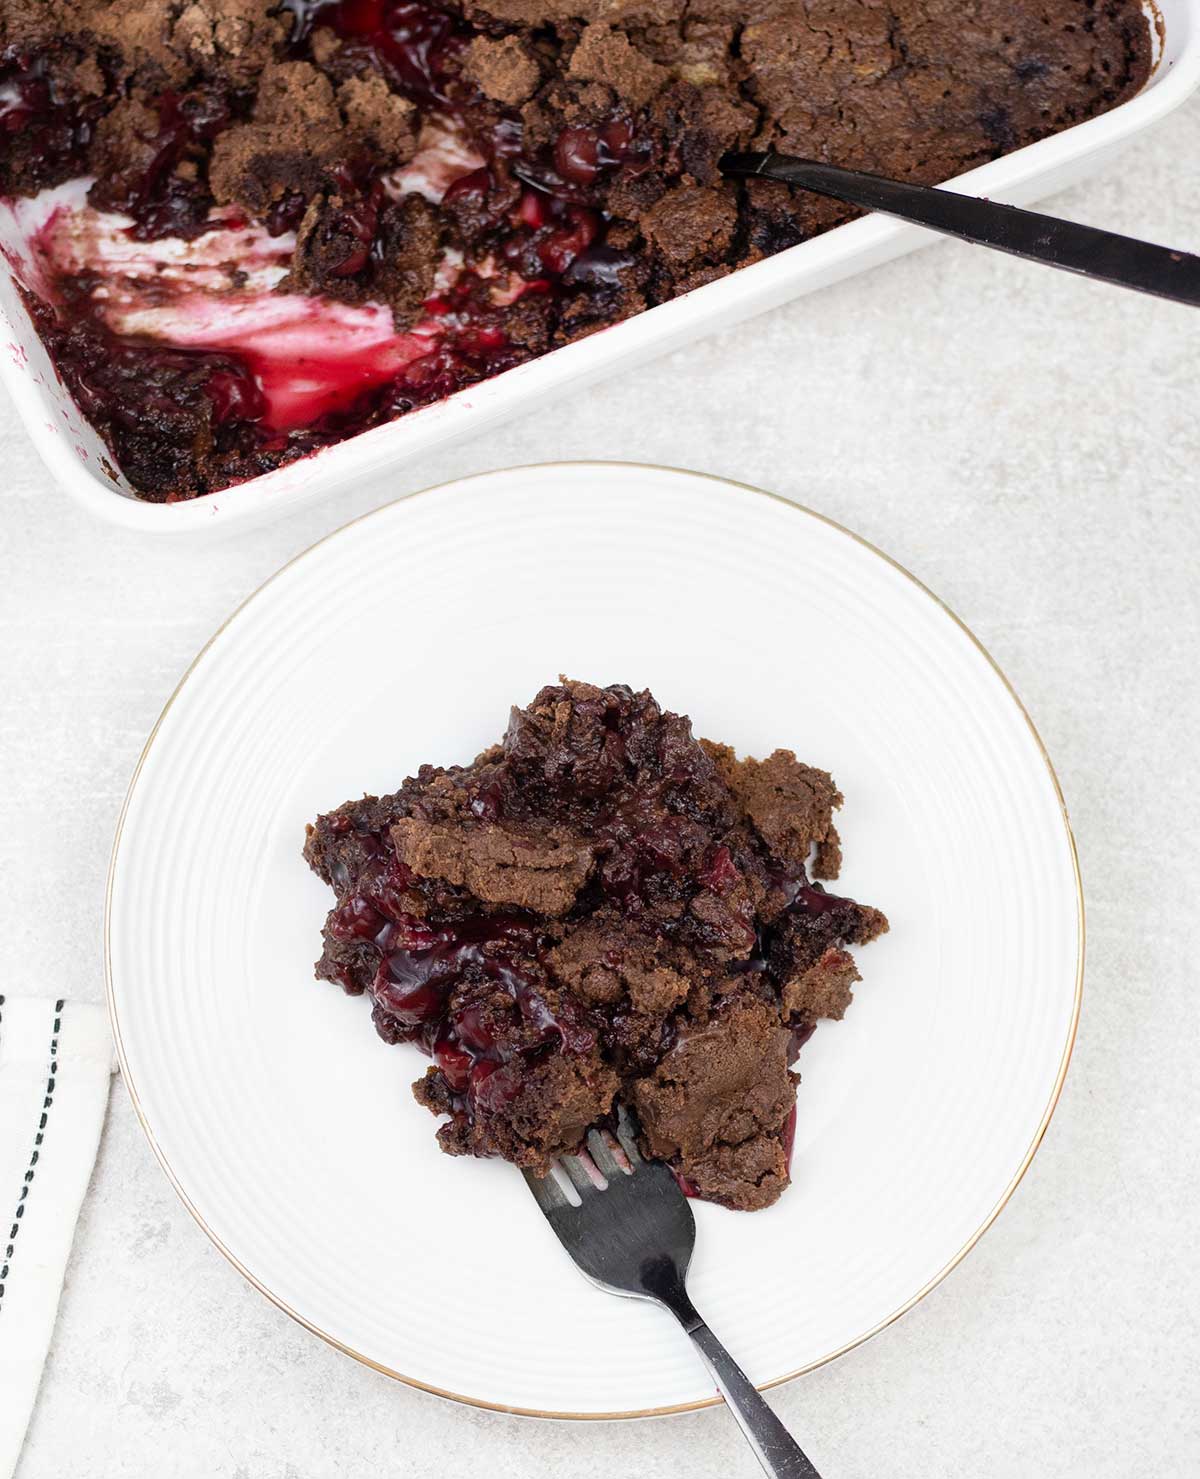 Chocolate cherry dump cake with cherry pie filling in a serving plate.